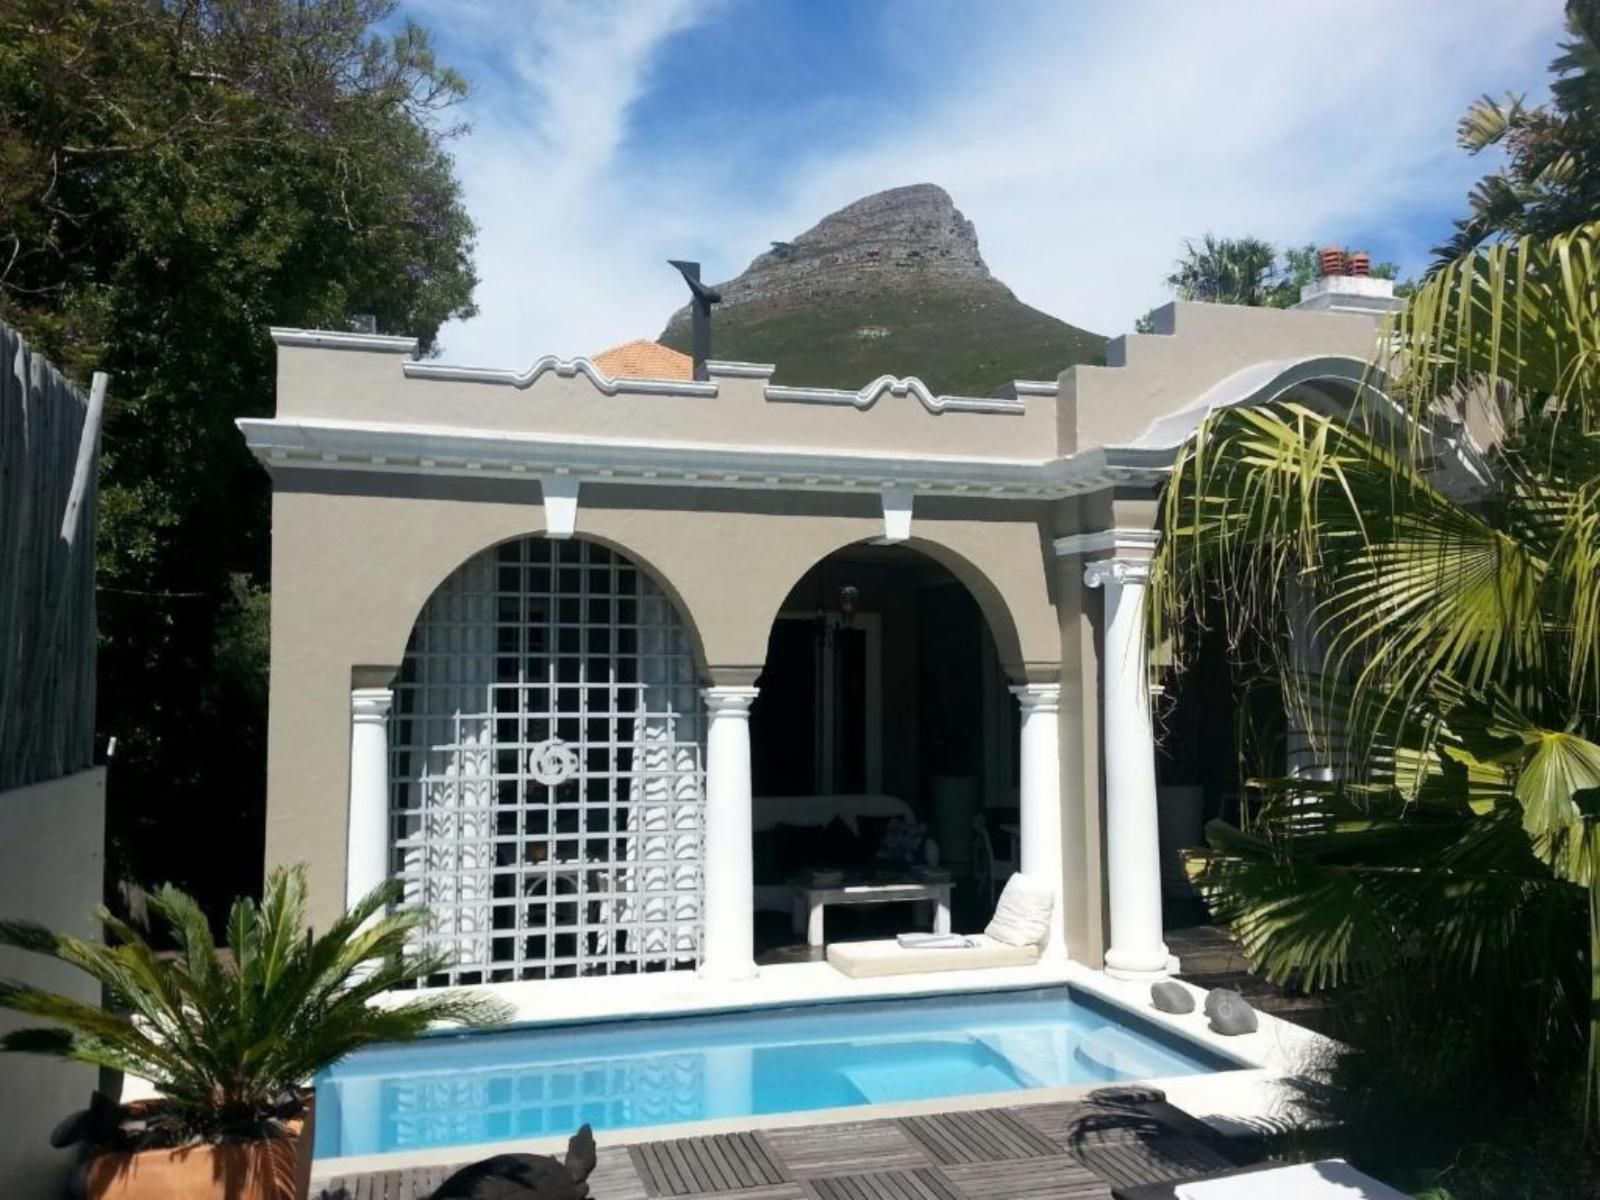 Jardin D Ebene Boutique Guest House Tamboerskloof Cape Town Western Cape South Africa House, Building, Architecture